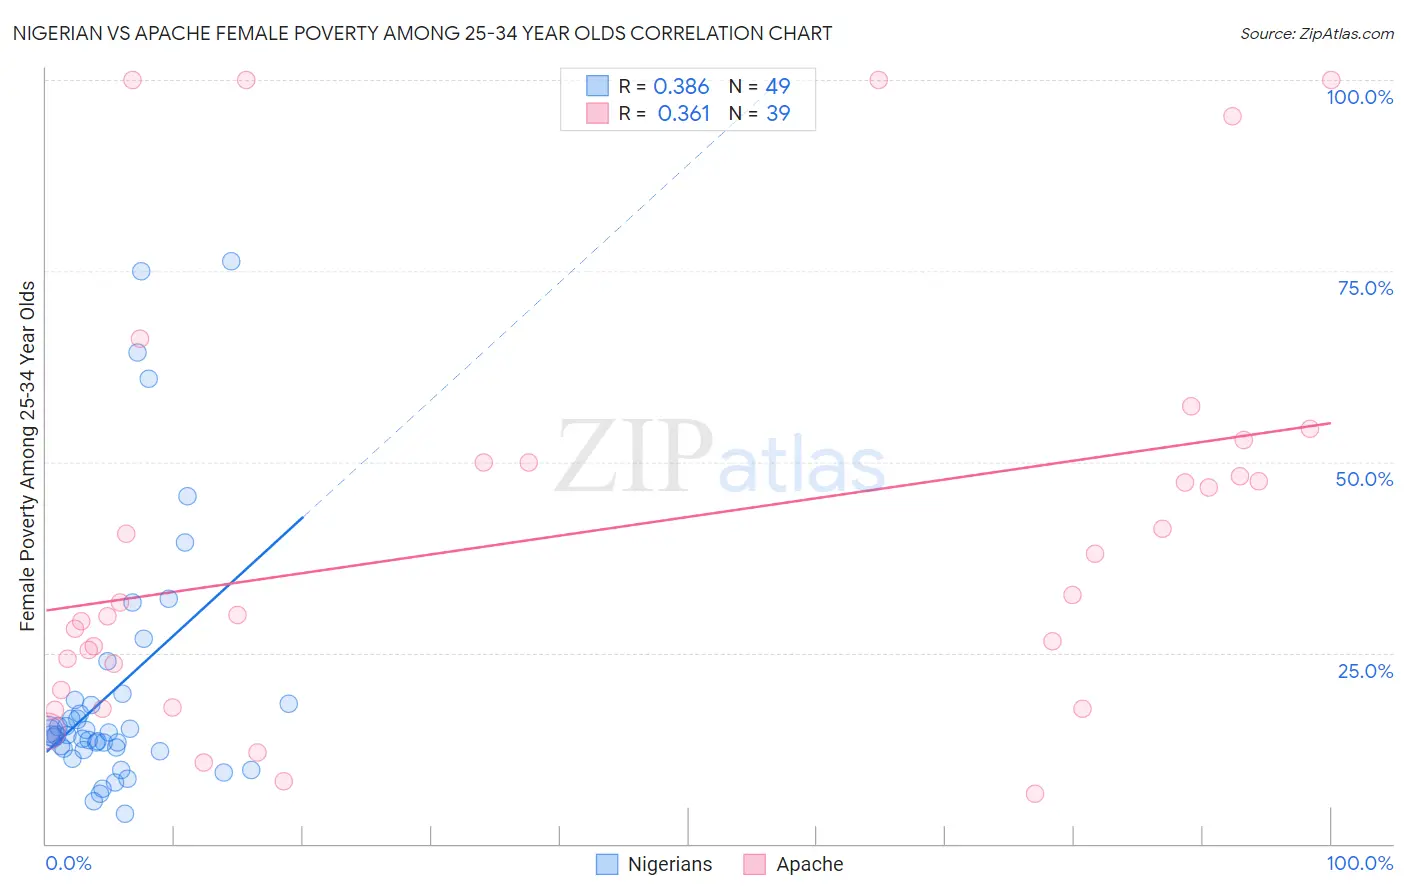 Nigerian vs Apache Female Poverty Among 25-34 Year Olds